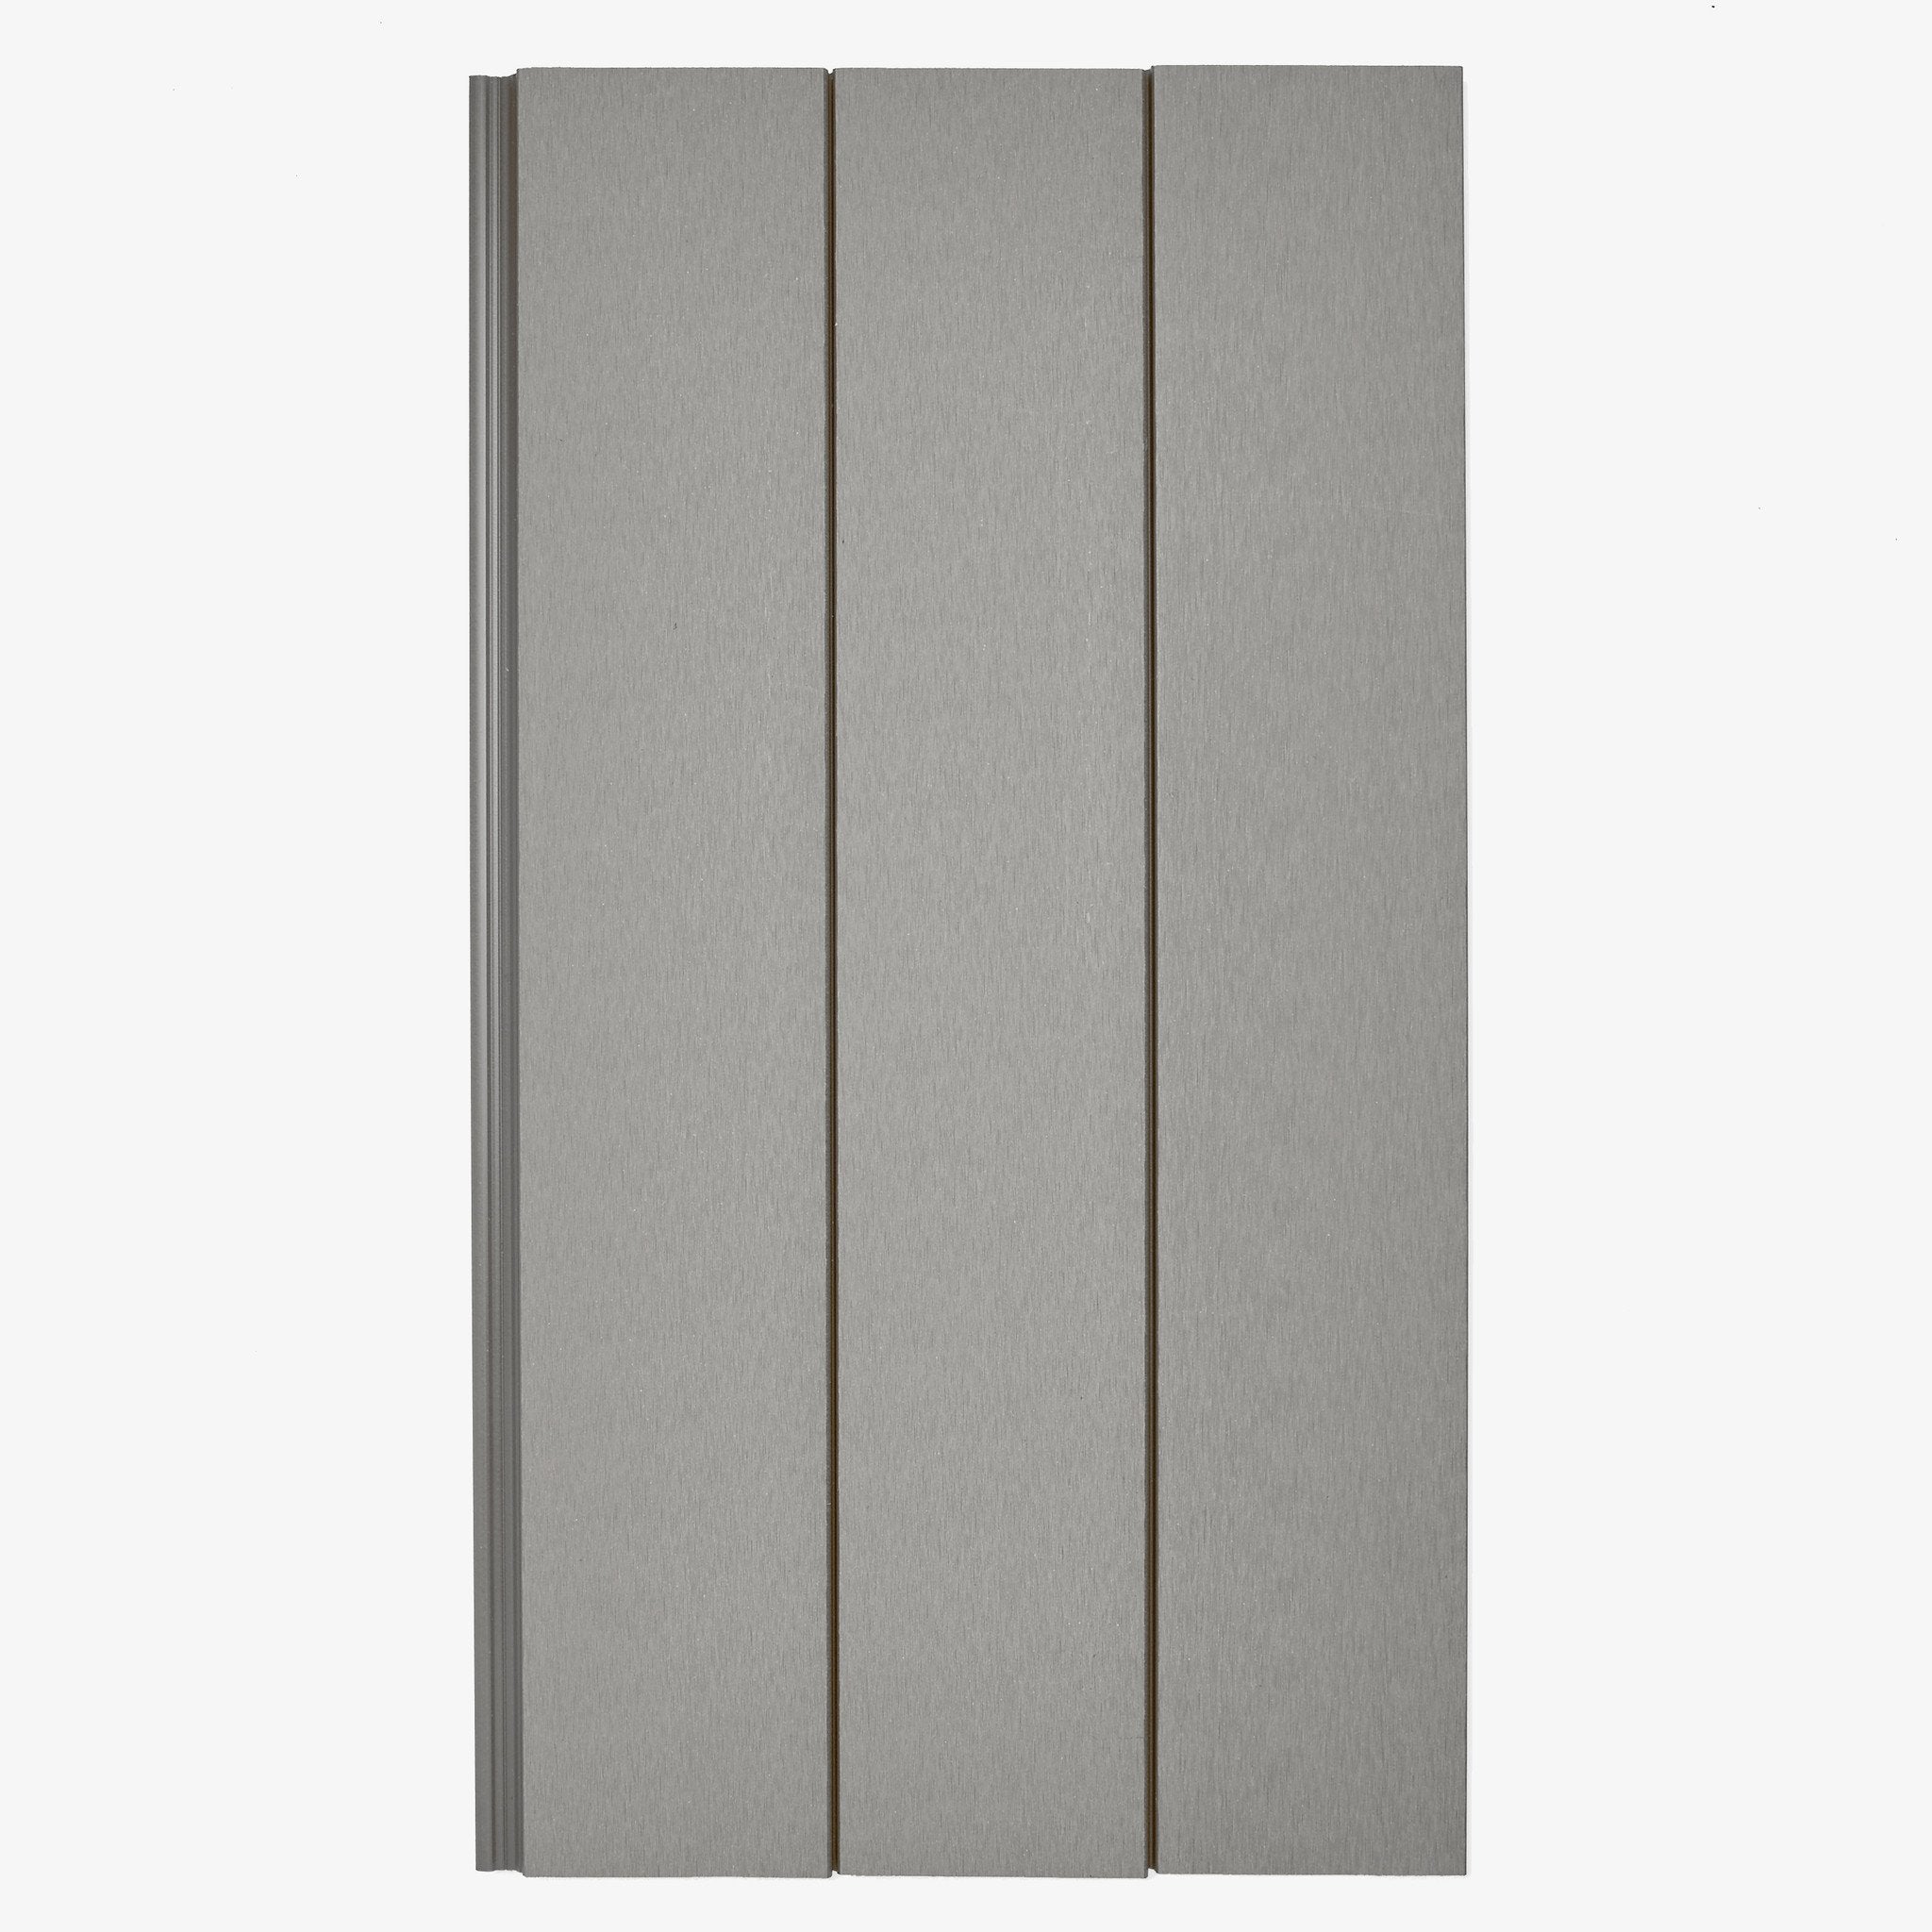 Hyperion composite cladding panel stone grey